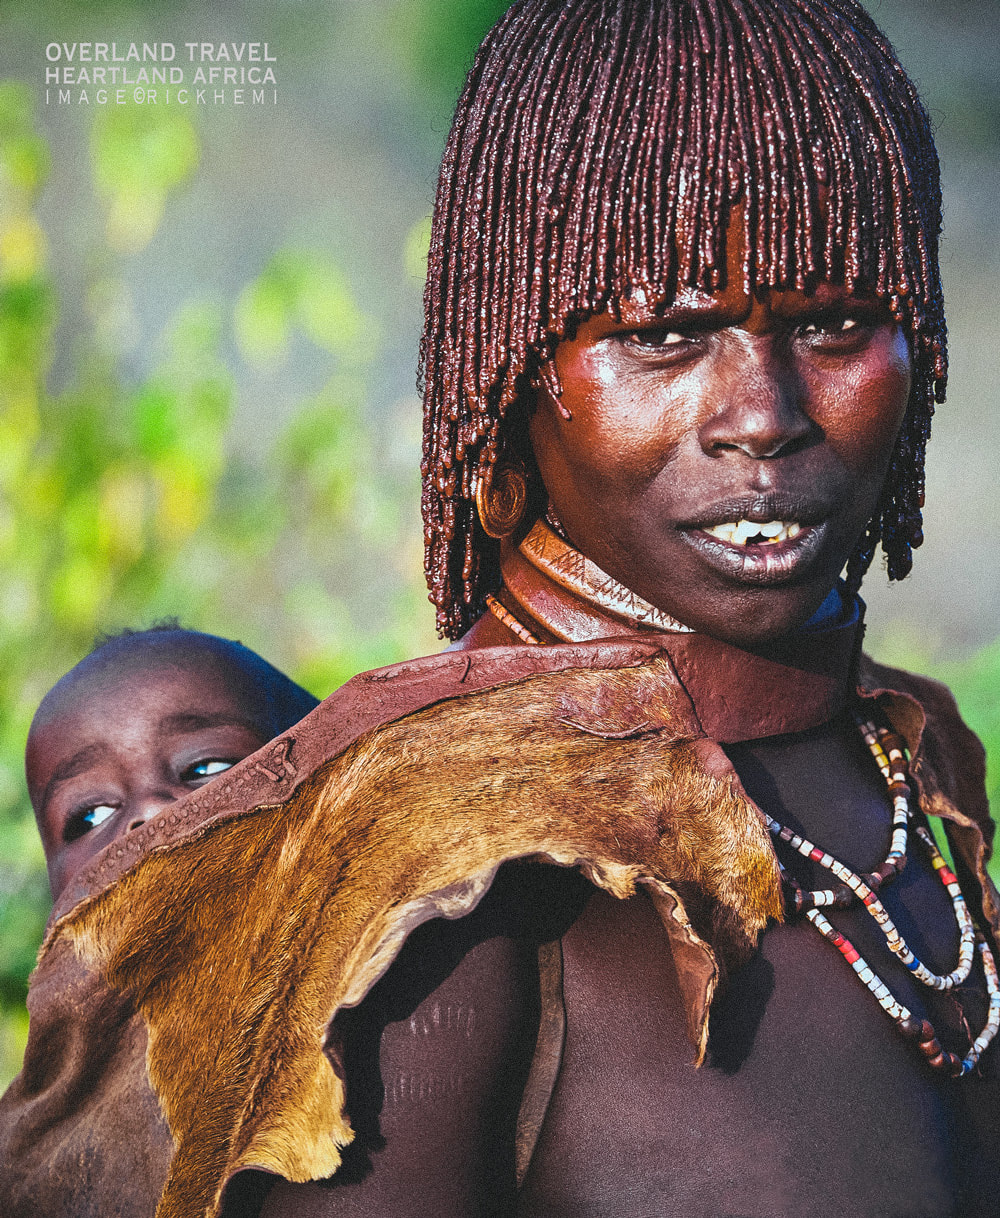 solo travel, Africa overland, tribal lands, image by Rick Hemi